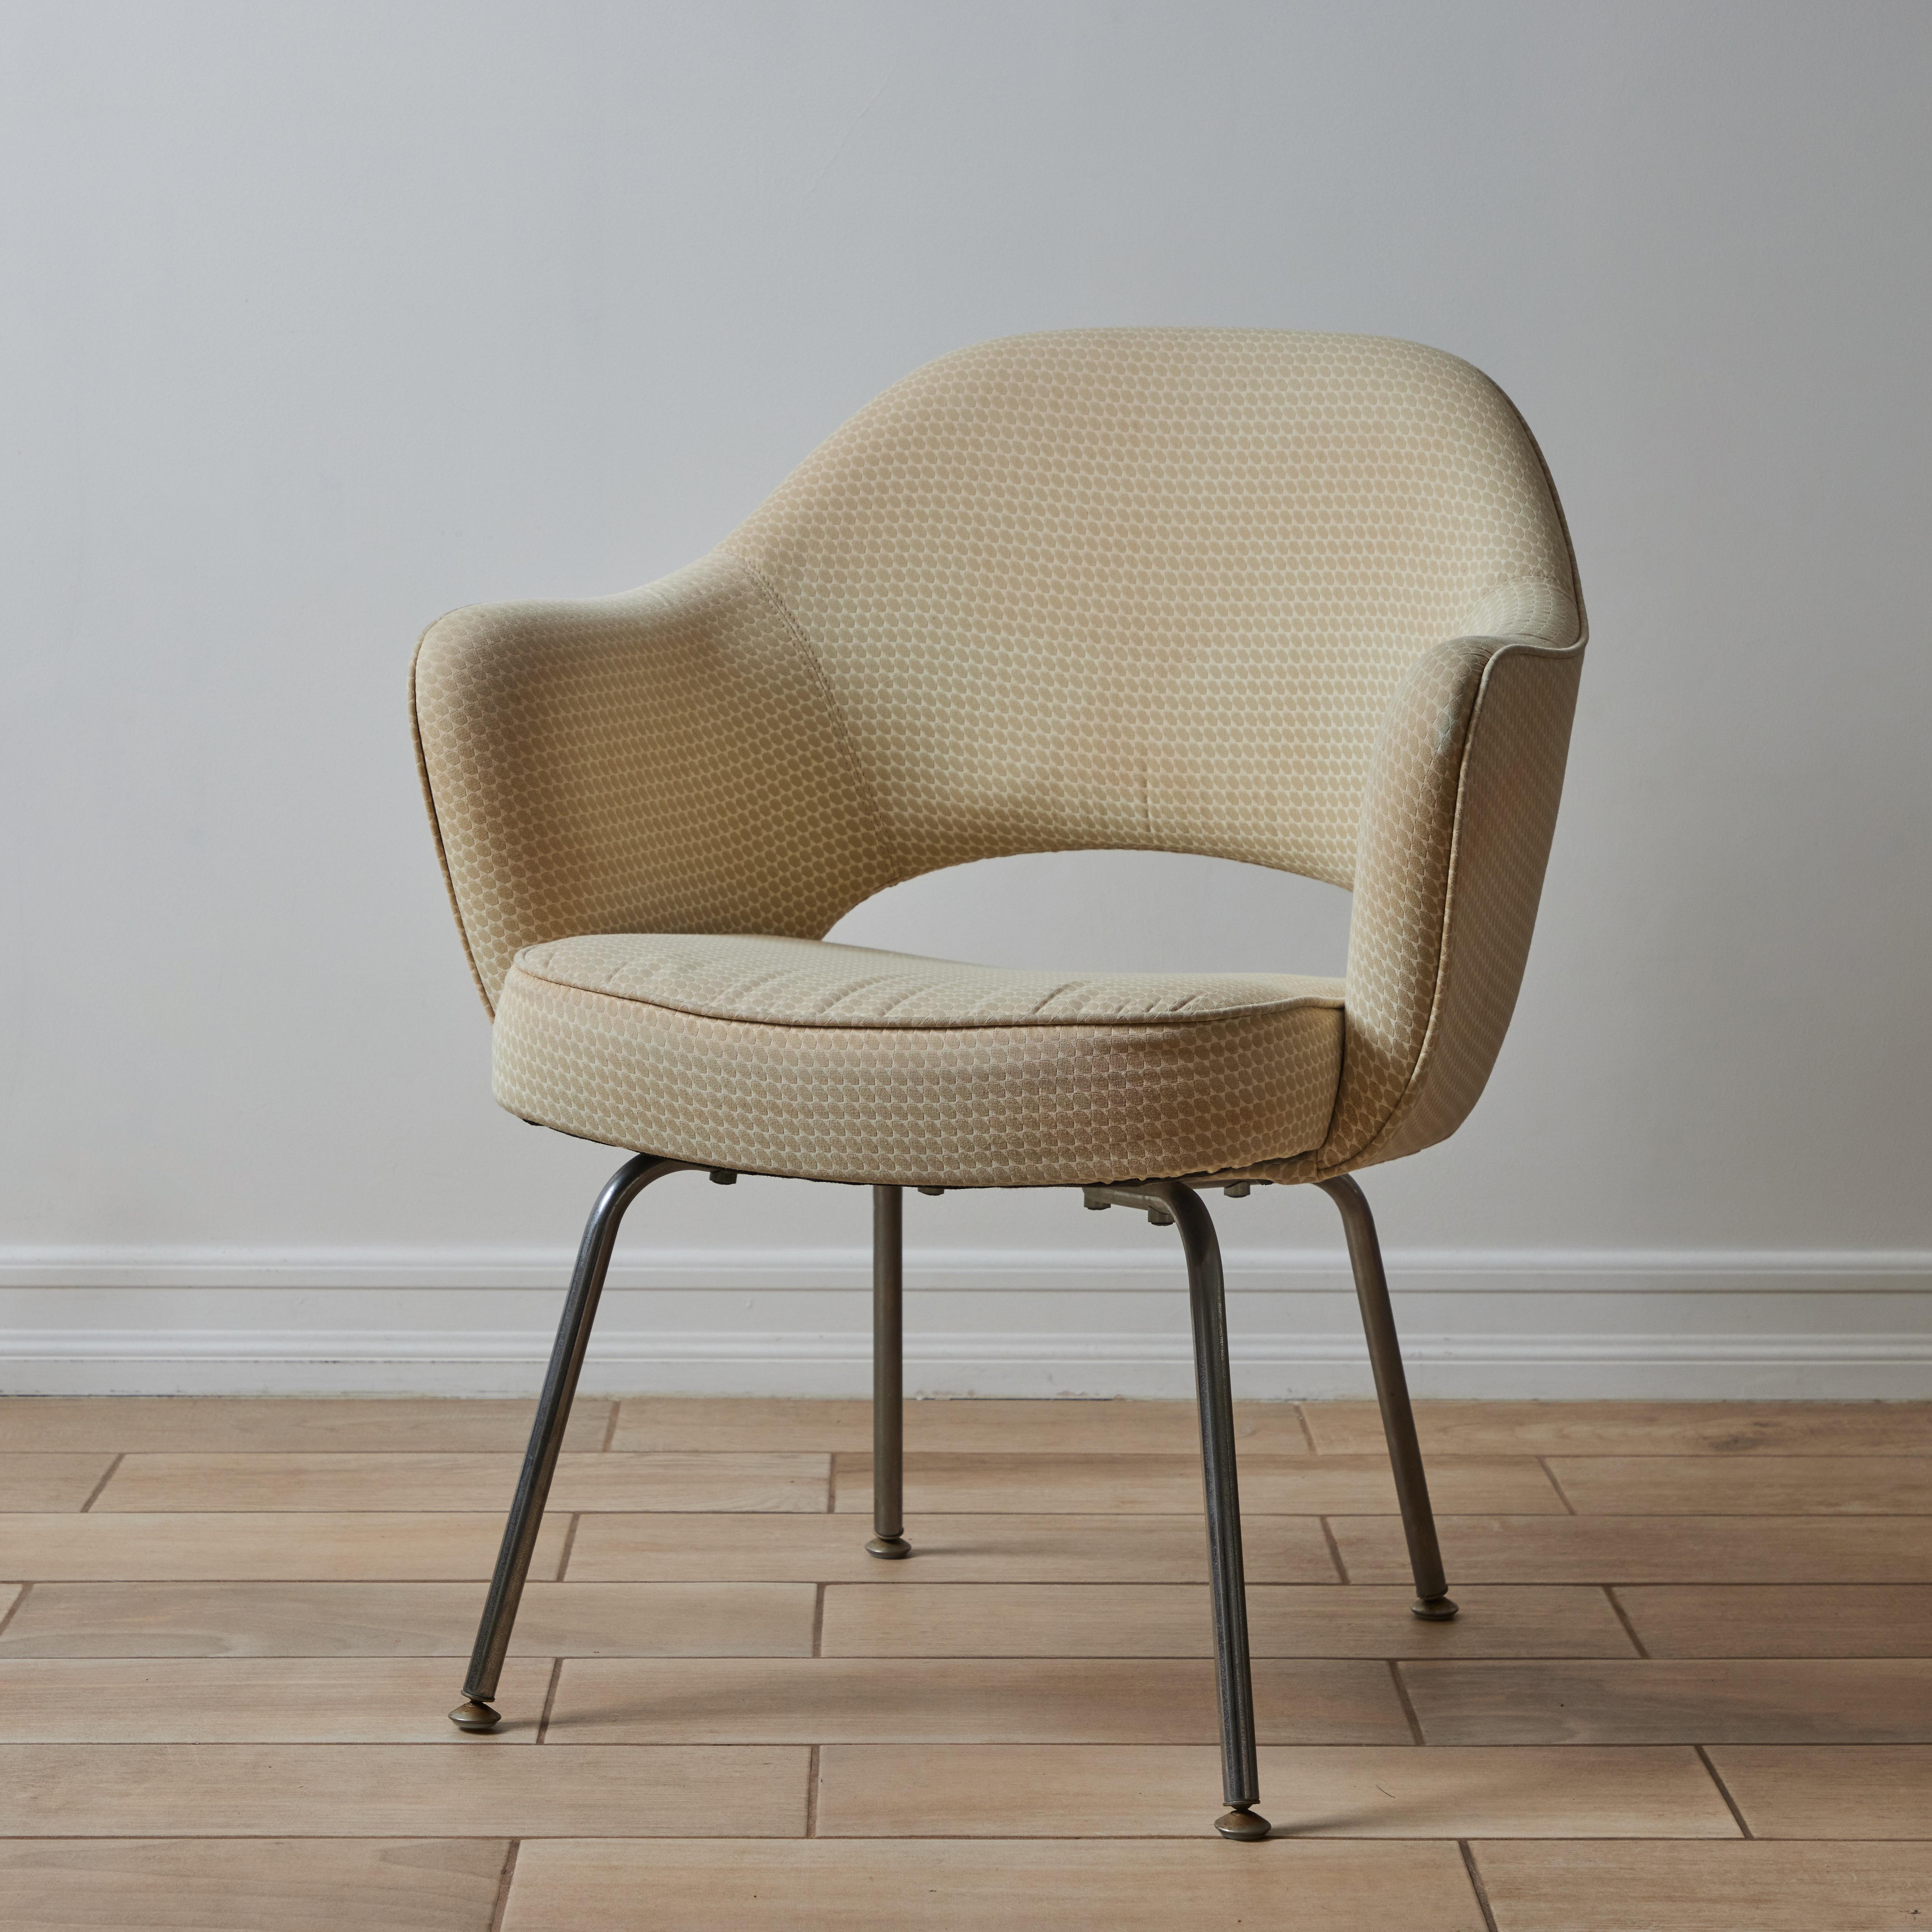 Eero Saarinen Executive Chair with metal legs for Knoll. Originally designed in 1946, this late 1990s / early 2000s edition is executed in geometric fabric and metal legs with Knoll manufacturer's stamp on the underside of the chair. 

A clean and